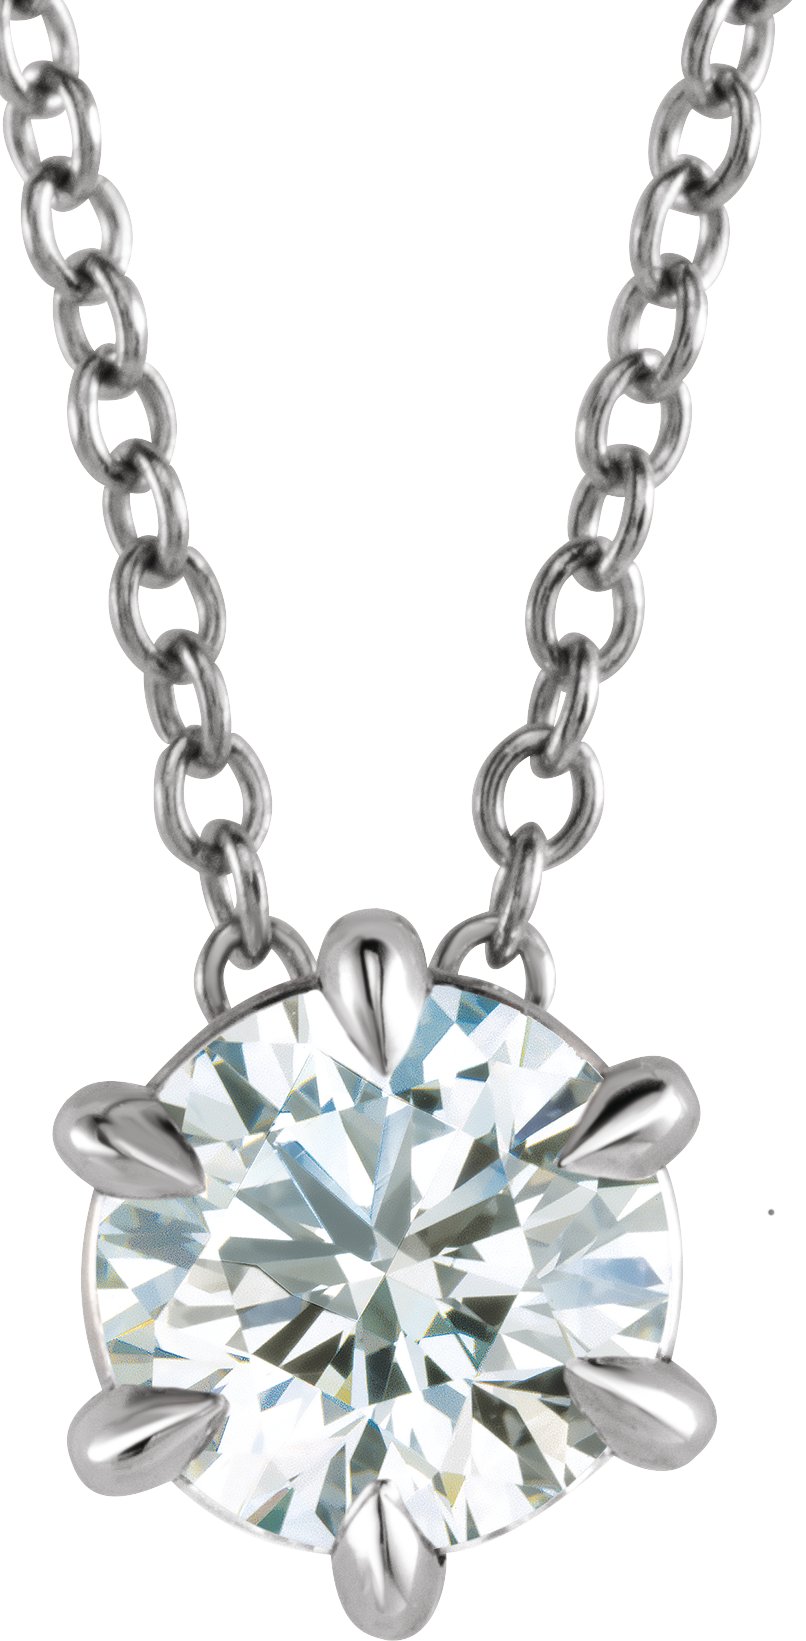 14K White 5/8 CT Lab-Grown Diamond Solitaire 16-18" Necklace